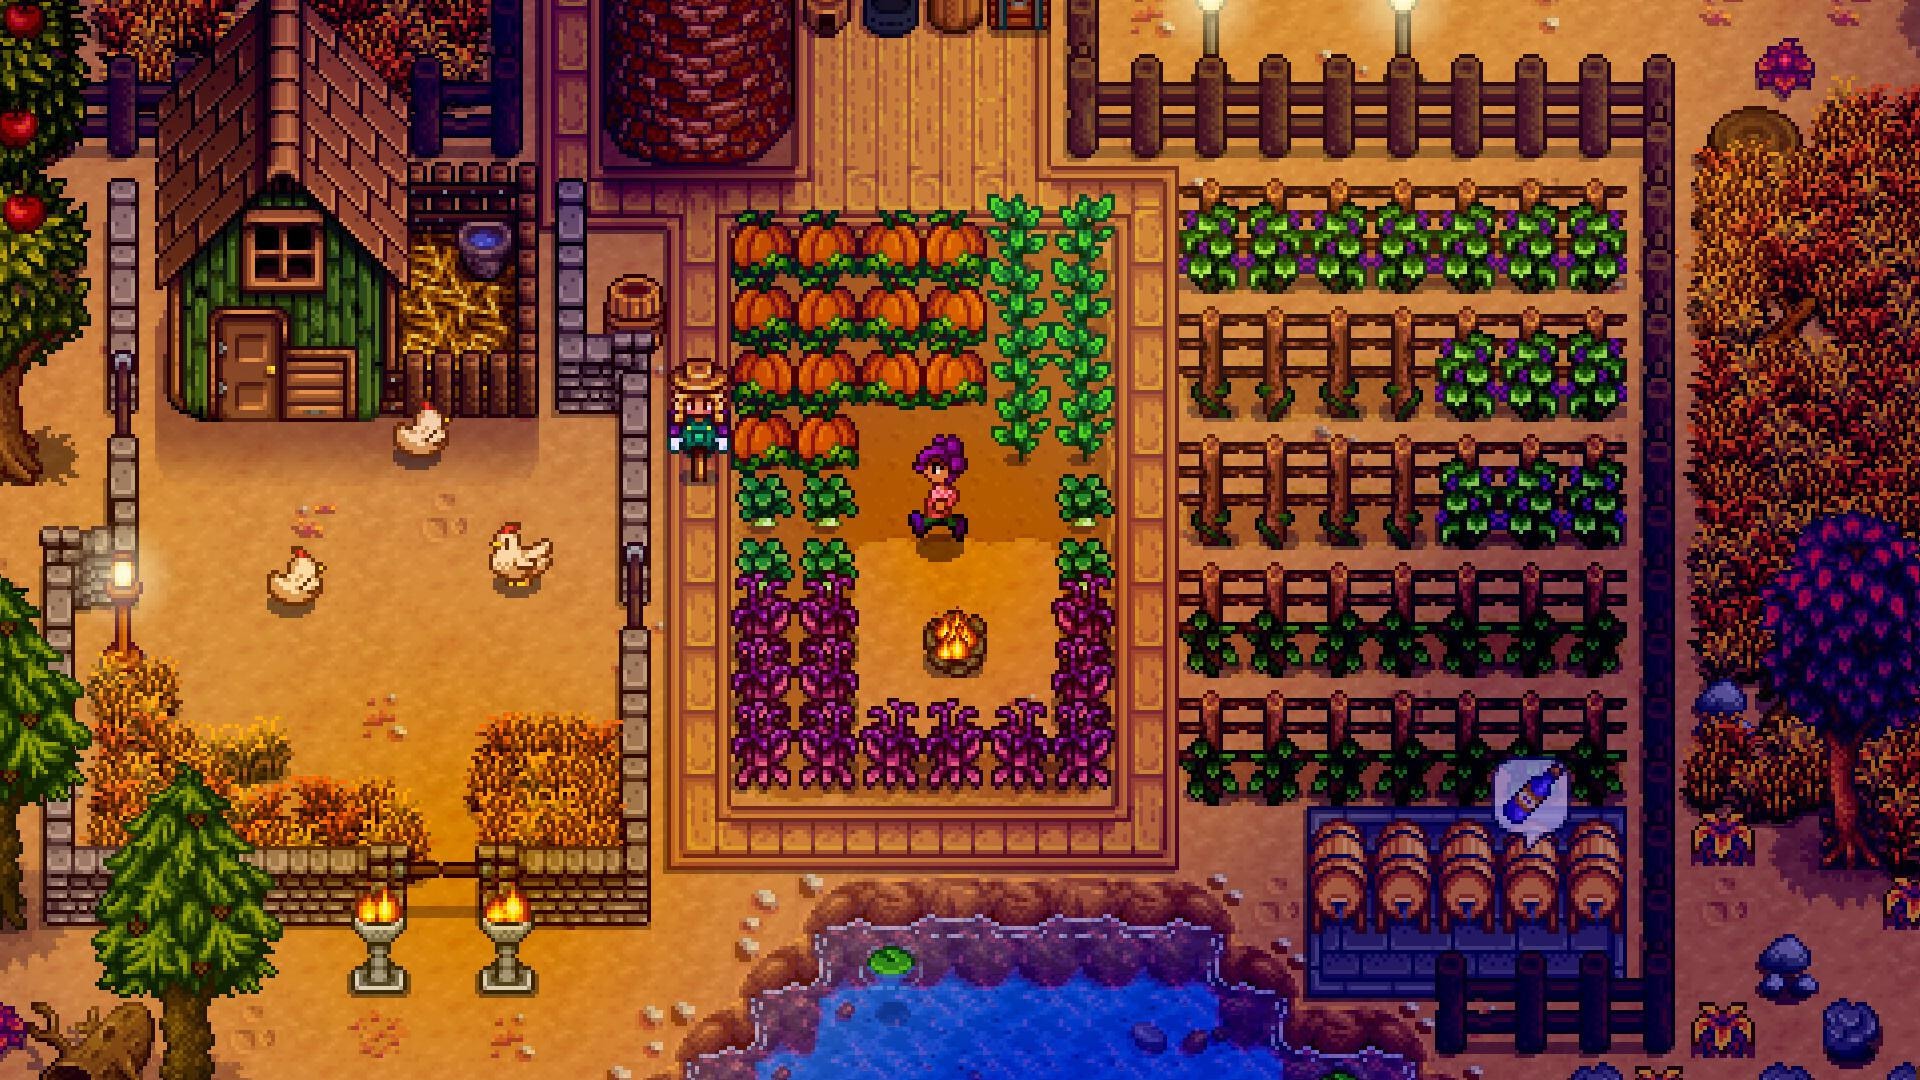 stardew-valleys-next-update-adds-8-player-co-op-a-new-festival-and-a-lot-of-dialogue